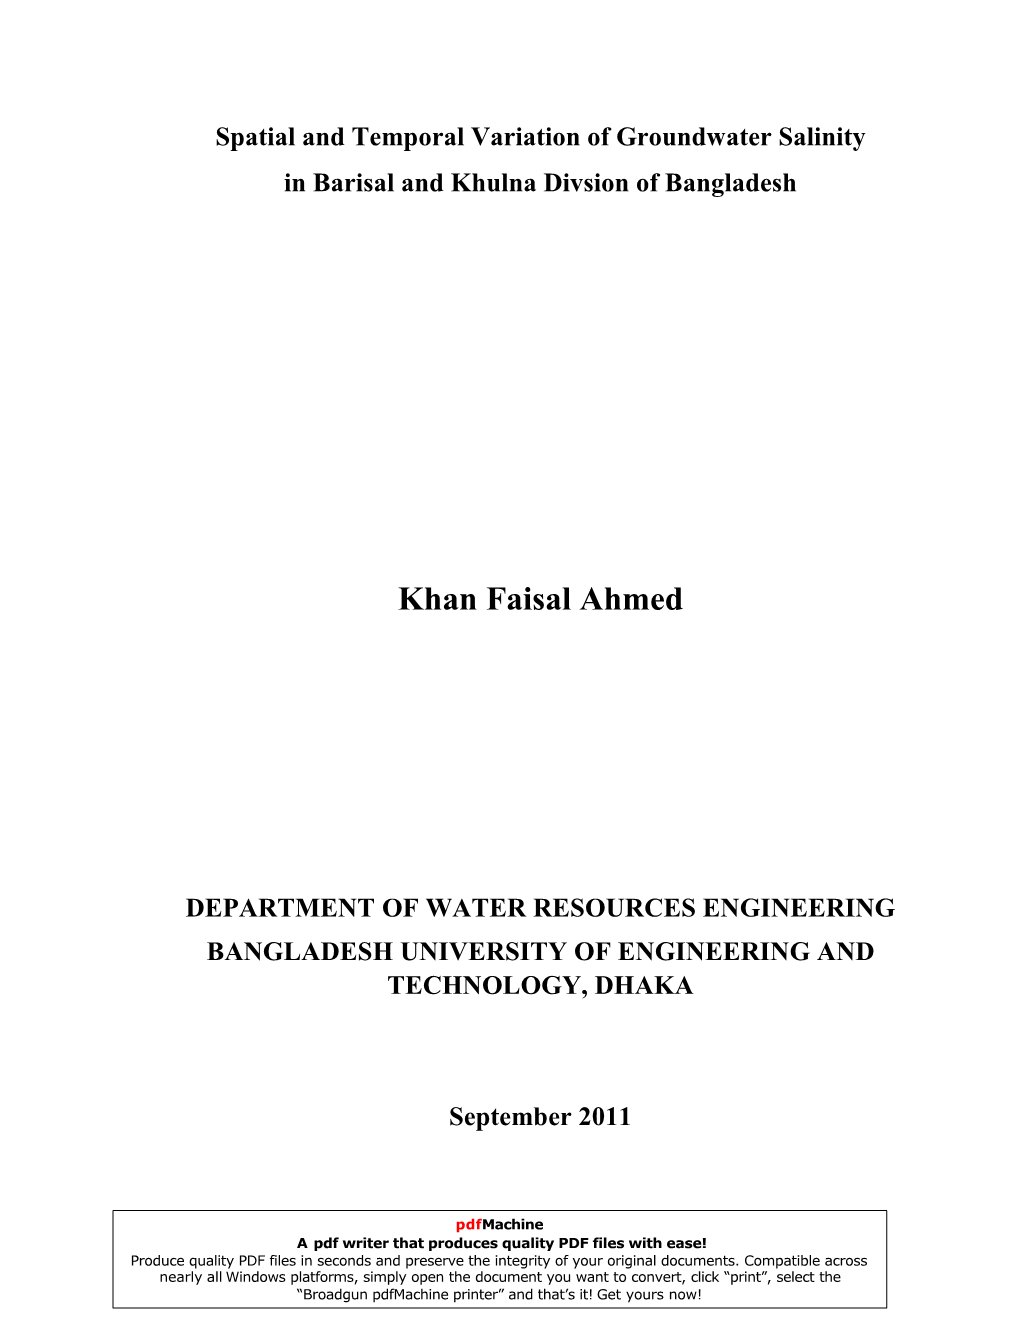 Spatial and Temporal Variation of Groundwater Salinity in Barisal and Khulna Divsion of Bangladesh